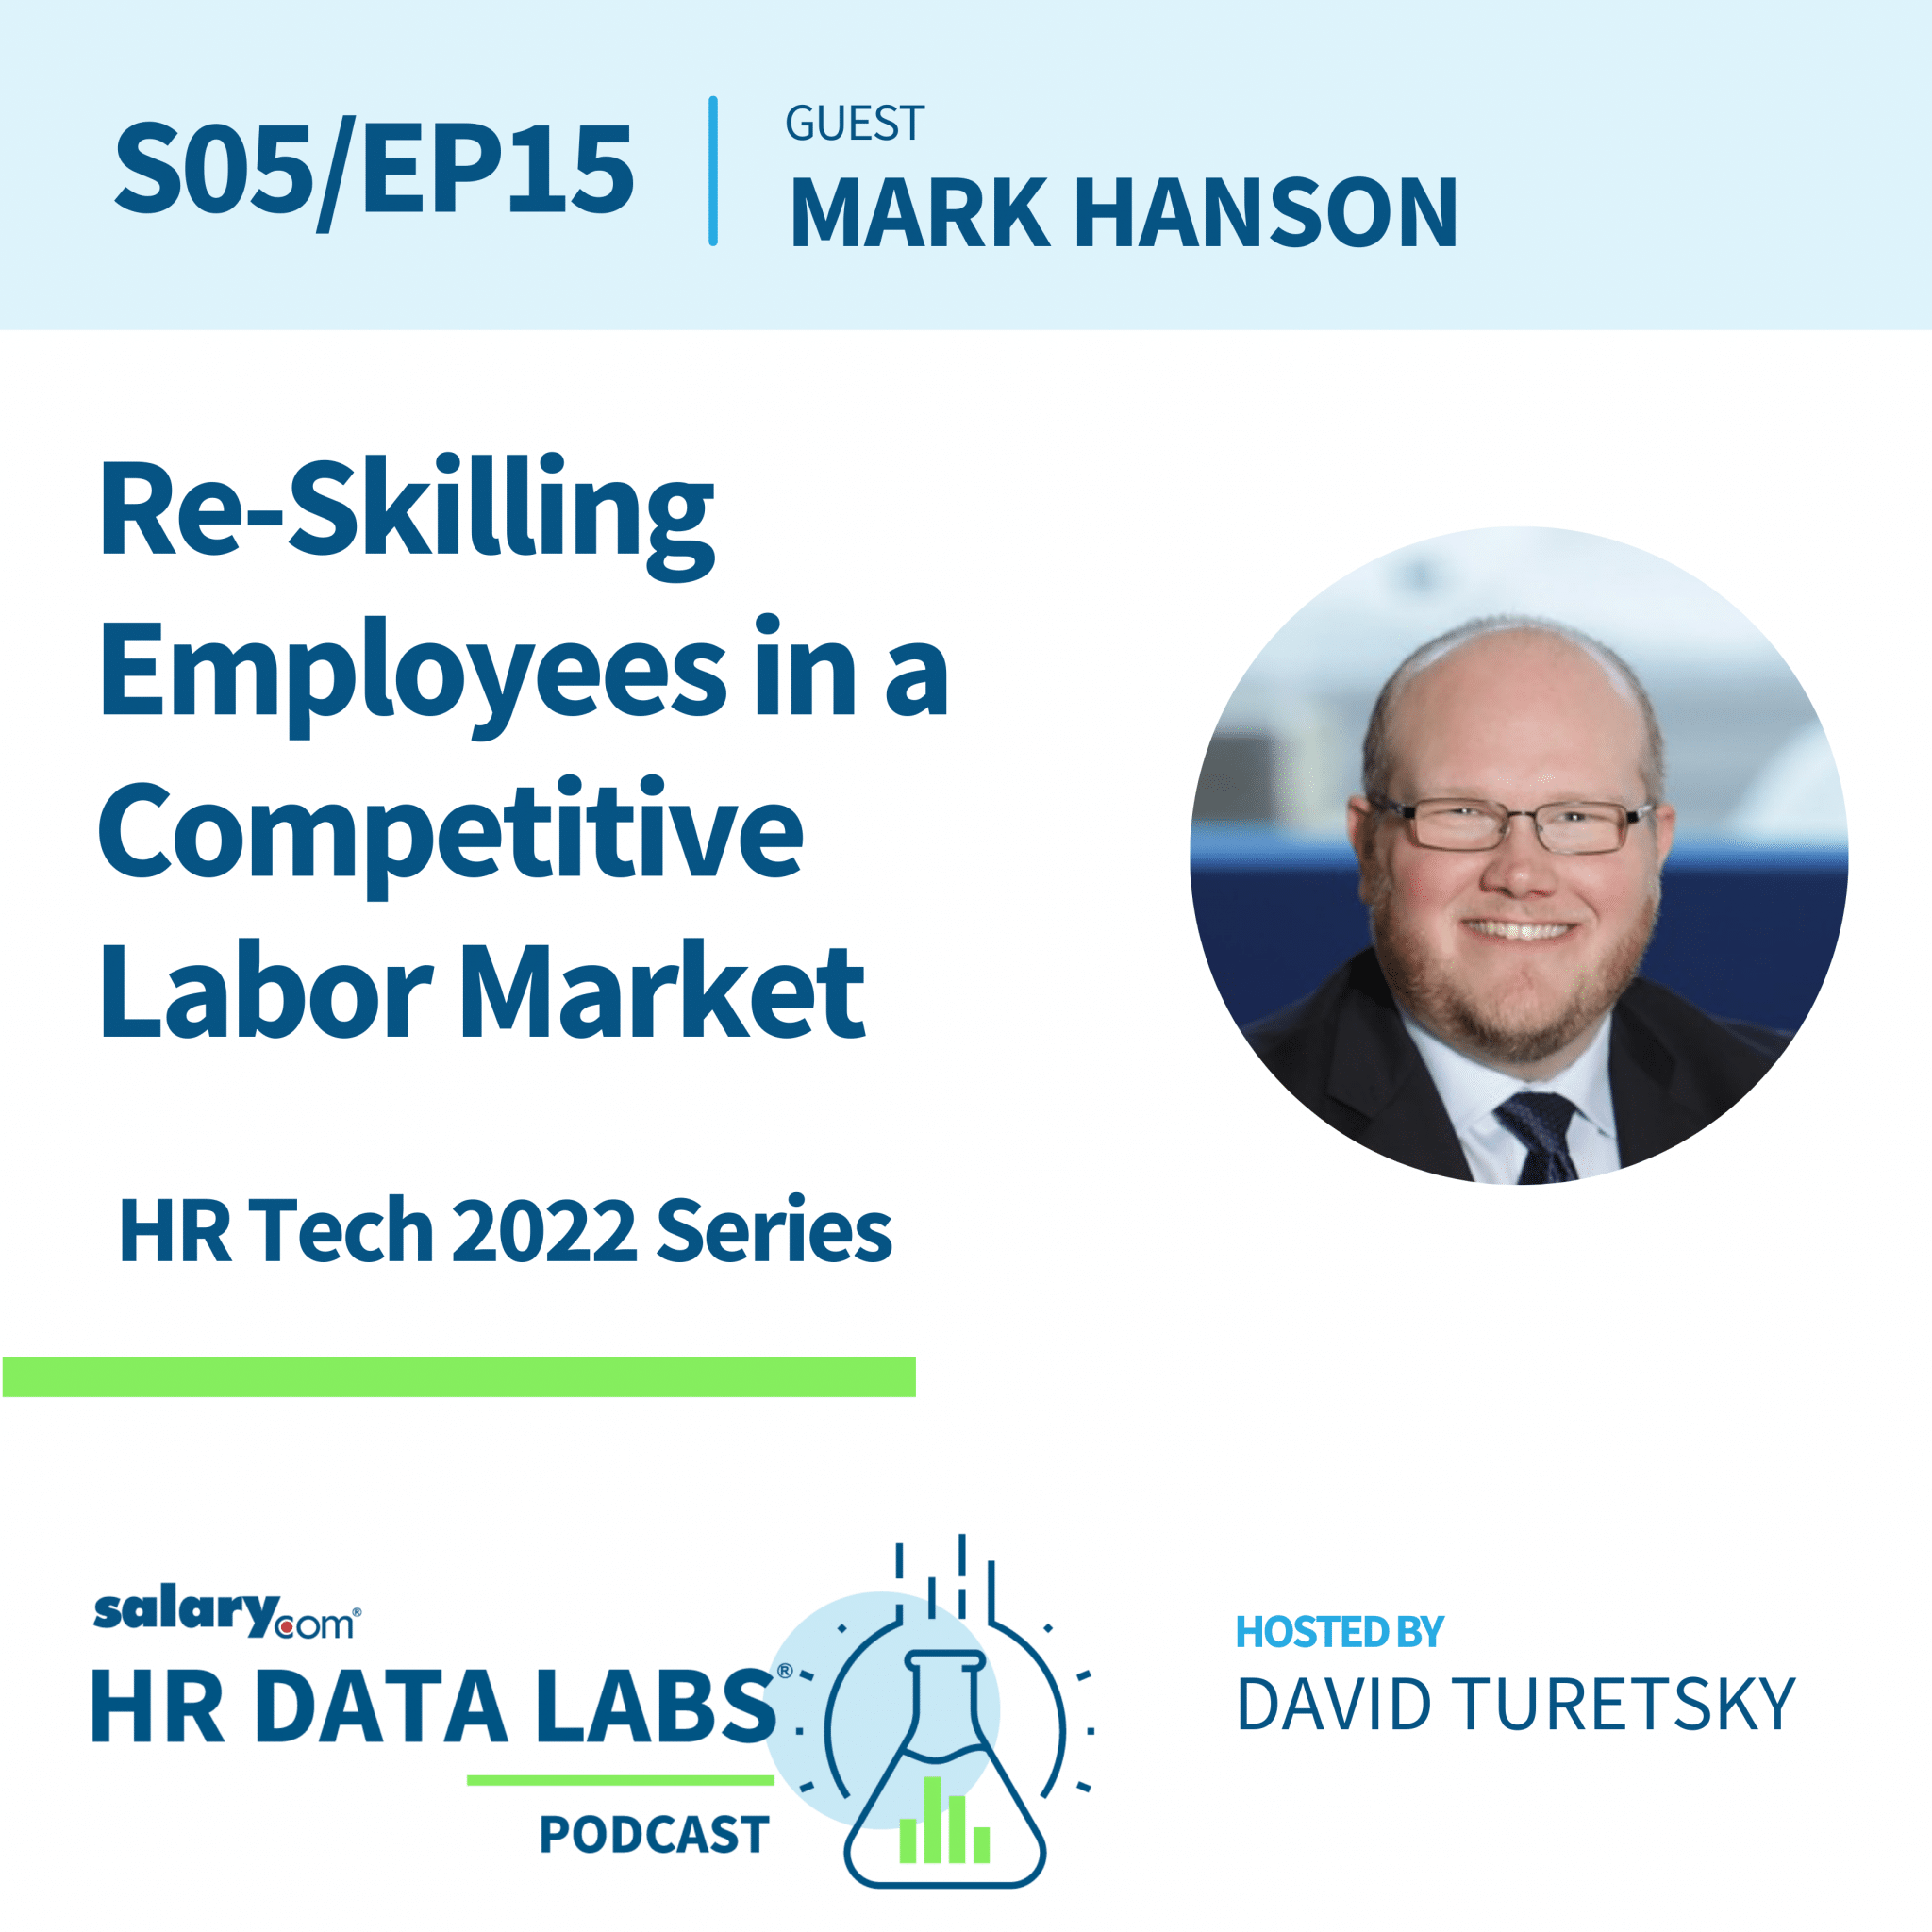 Mark Hanson – HR Tech 2022 Series – Re-Skilling Employees in a Competitive Labor Market